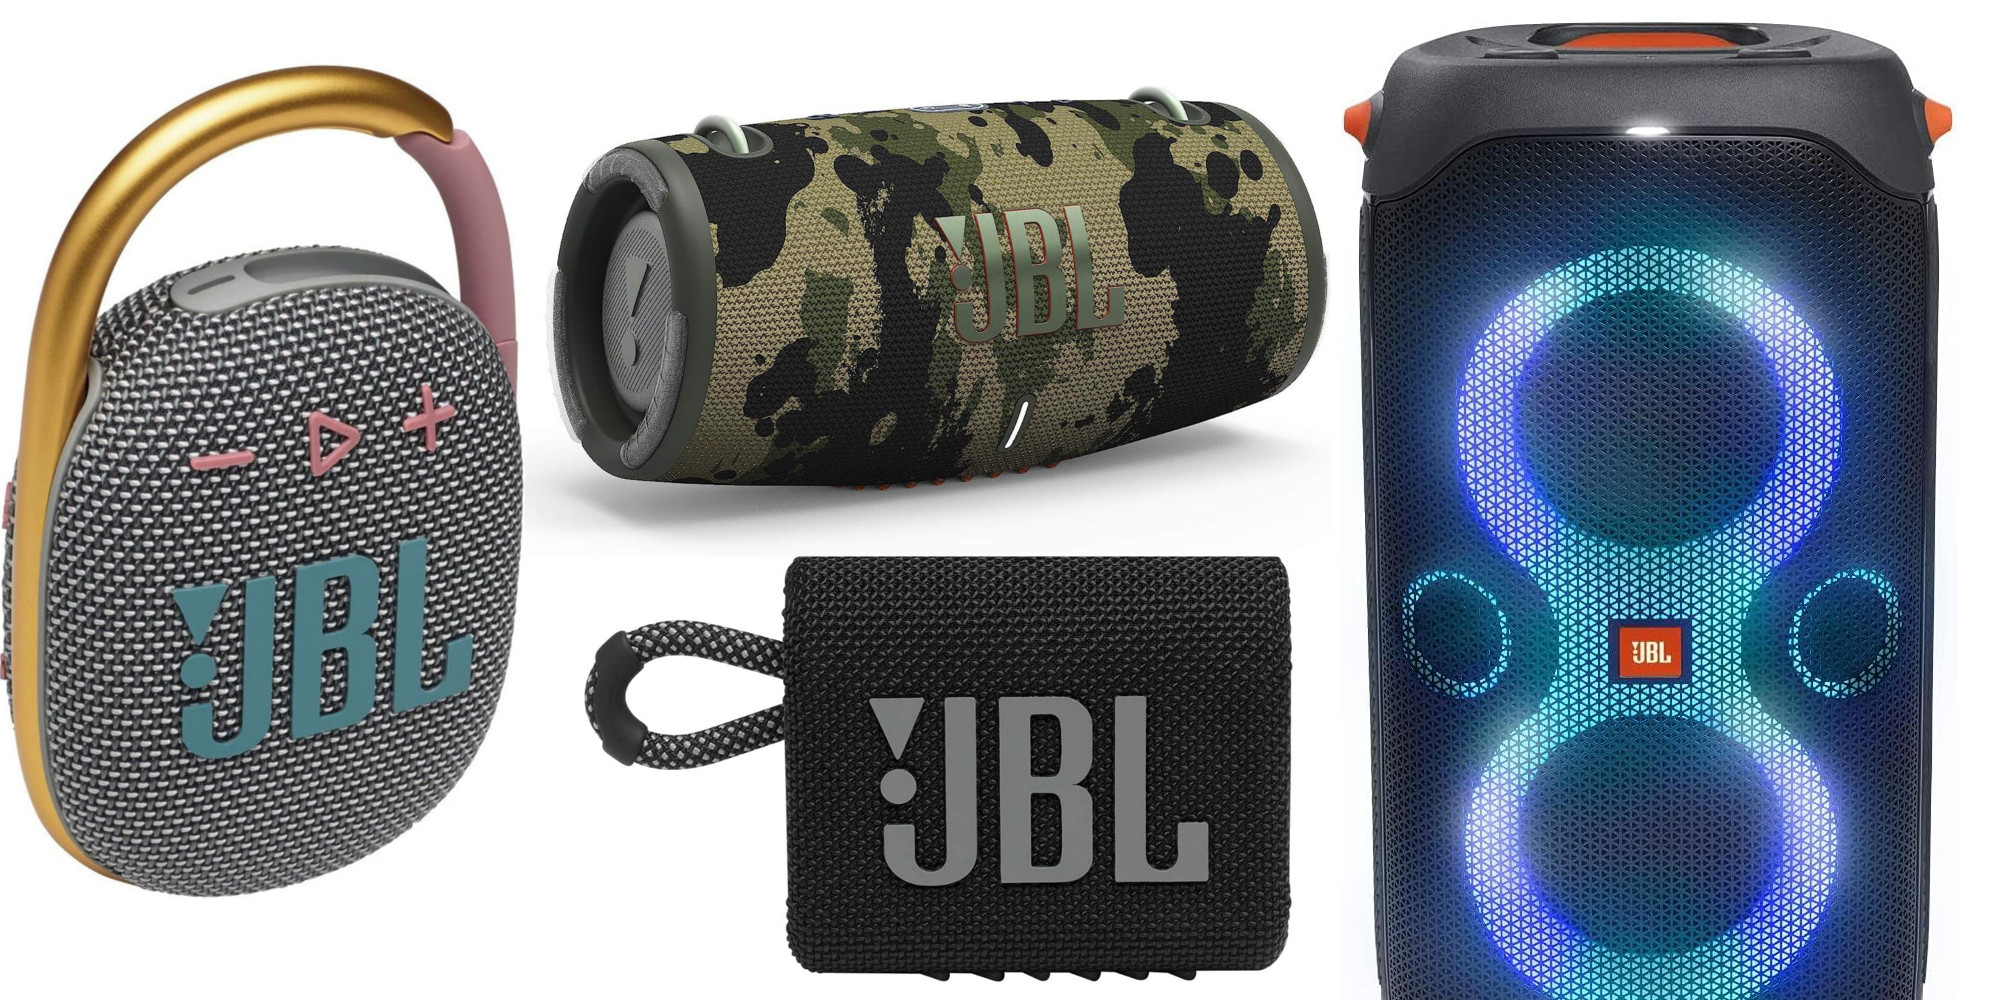 JBL Bluetooth speakers up to 50% off: Go 3, Clip 4, karaoke party models,  more from $25